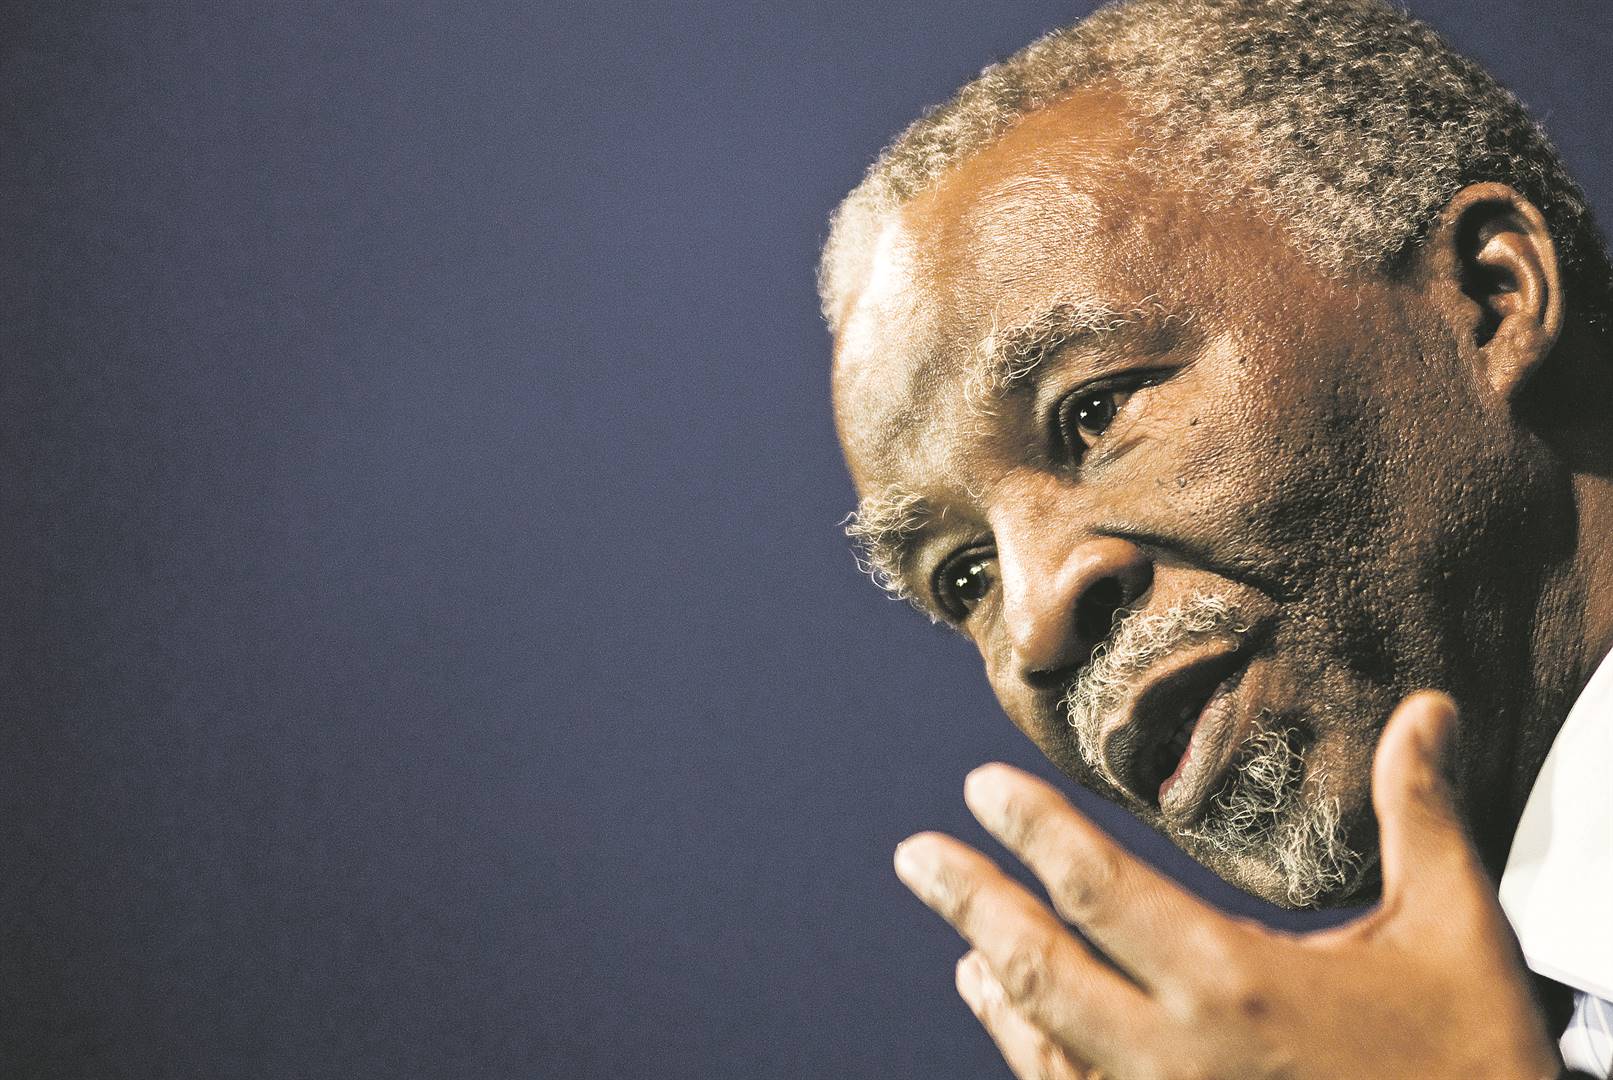 ‘If Mbeki’s removal from power was something of a regicide, this was because the ANC had ceded so much power to him that the only way to claim it back was to decapitate him’. Photo: Waldo Swiegers